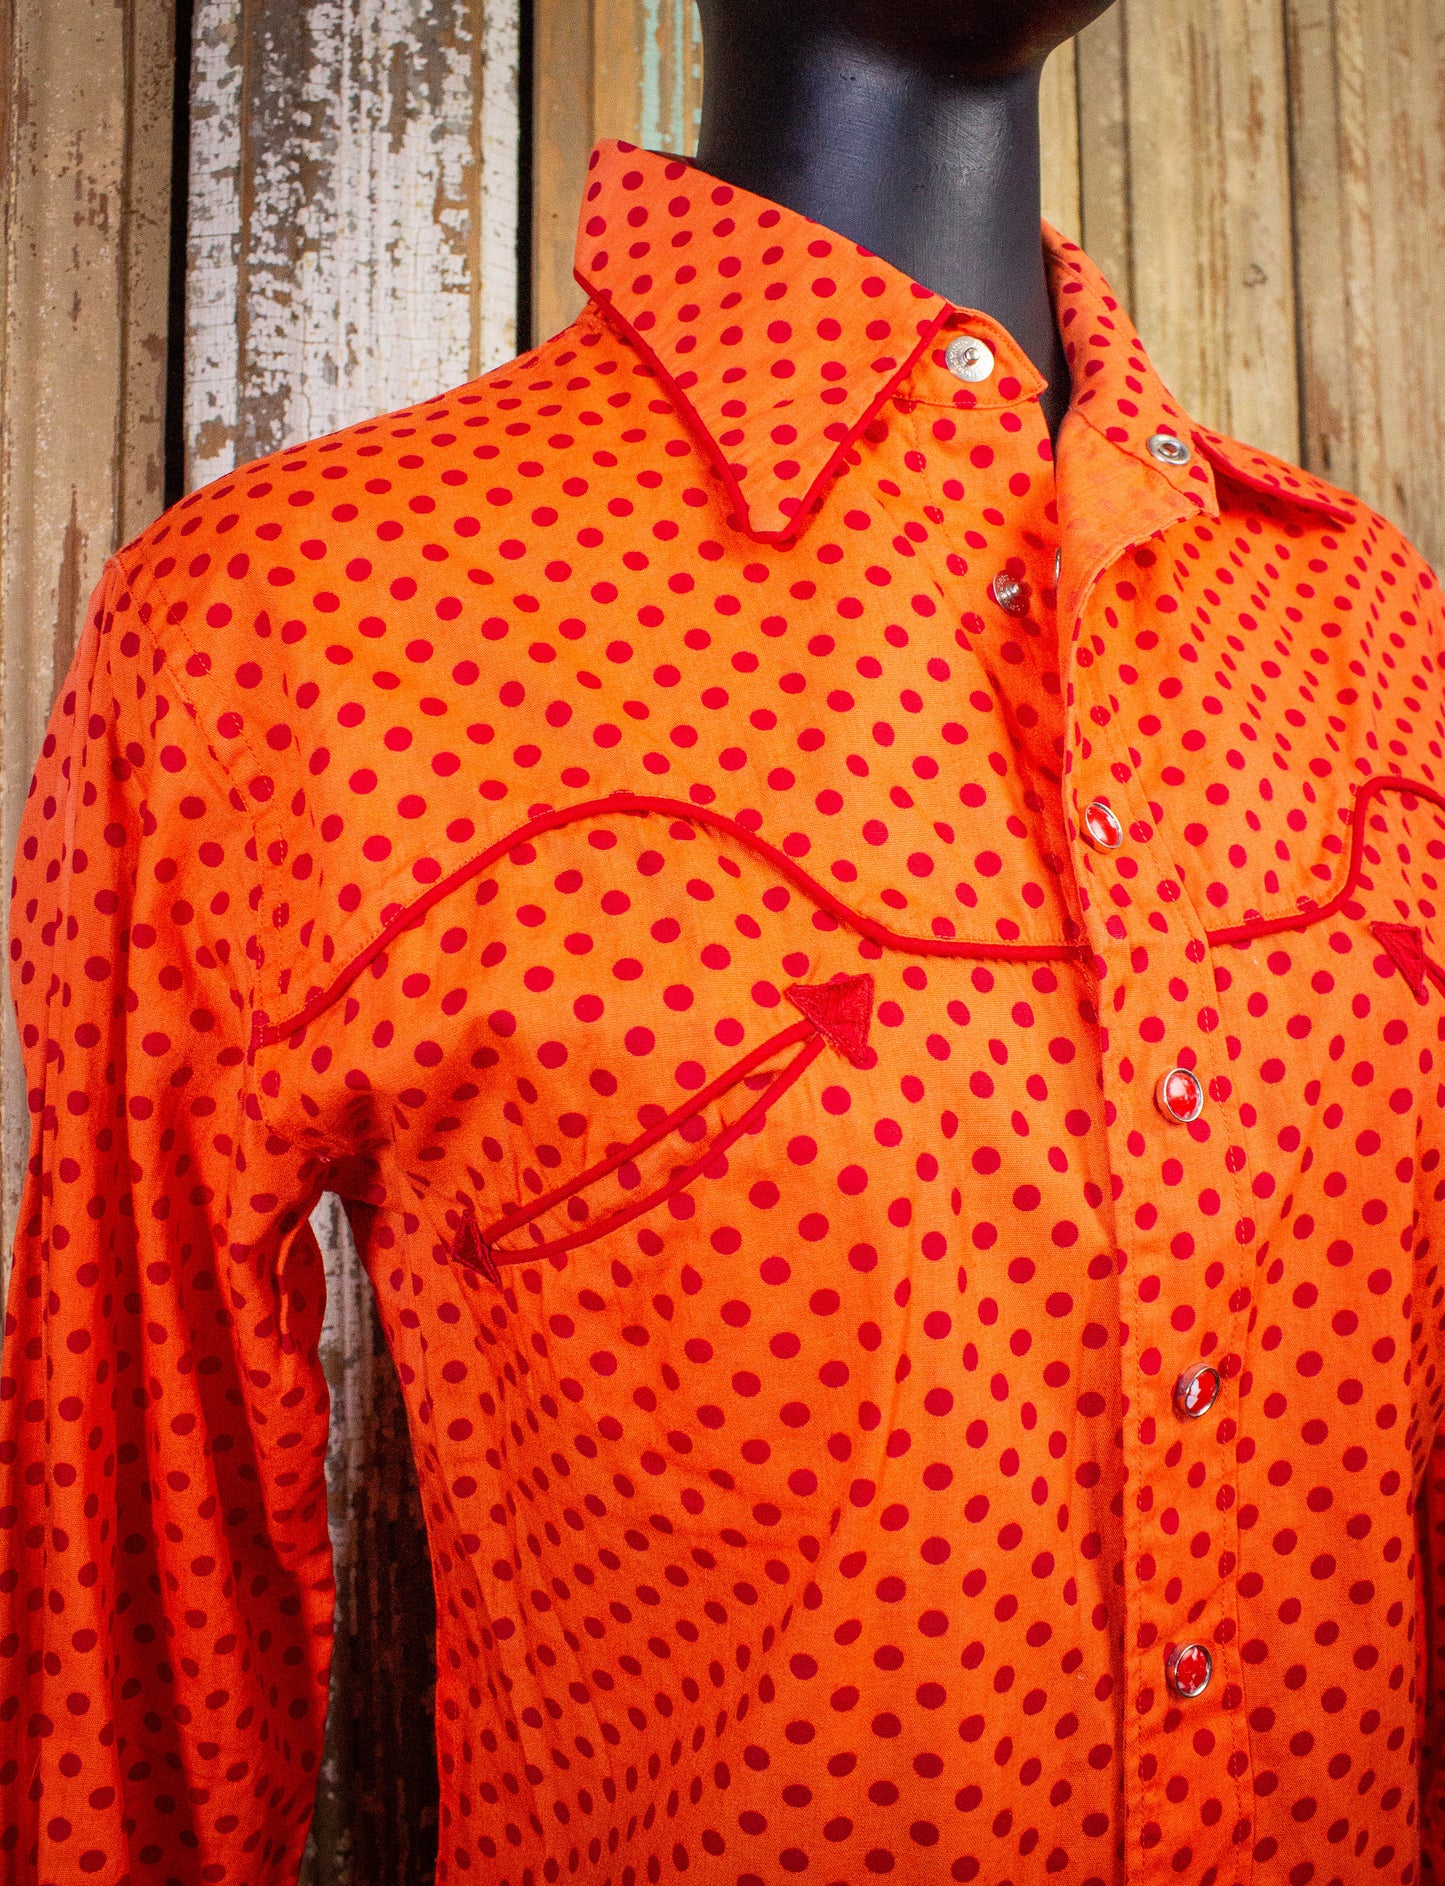 Vintage McClures Polka Dot Pearl Snap Western Shirt 60s Red/Orange Small